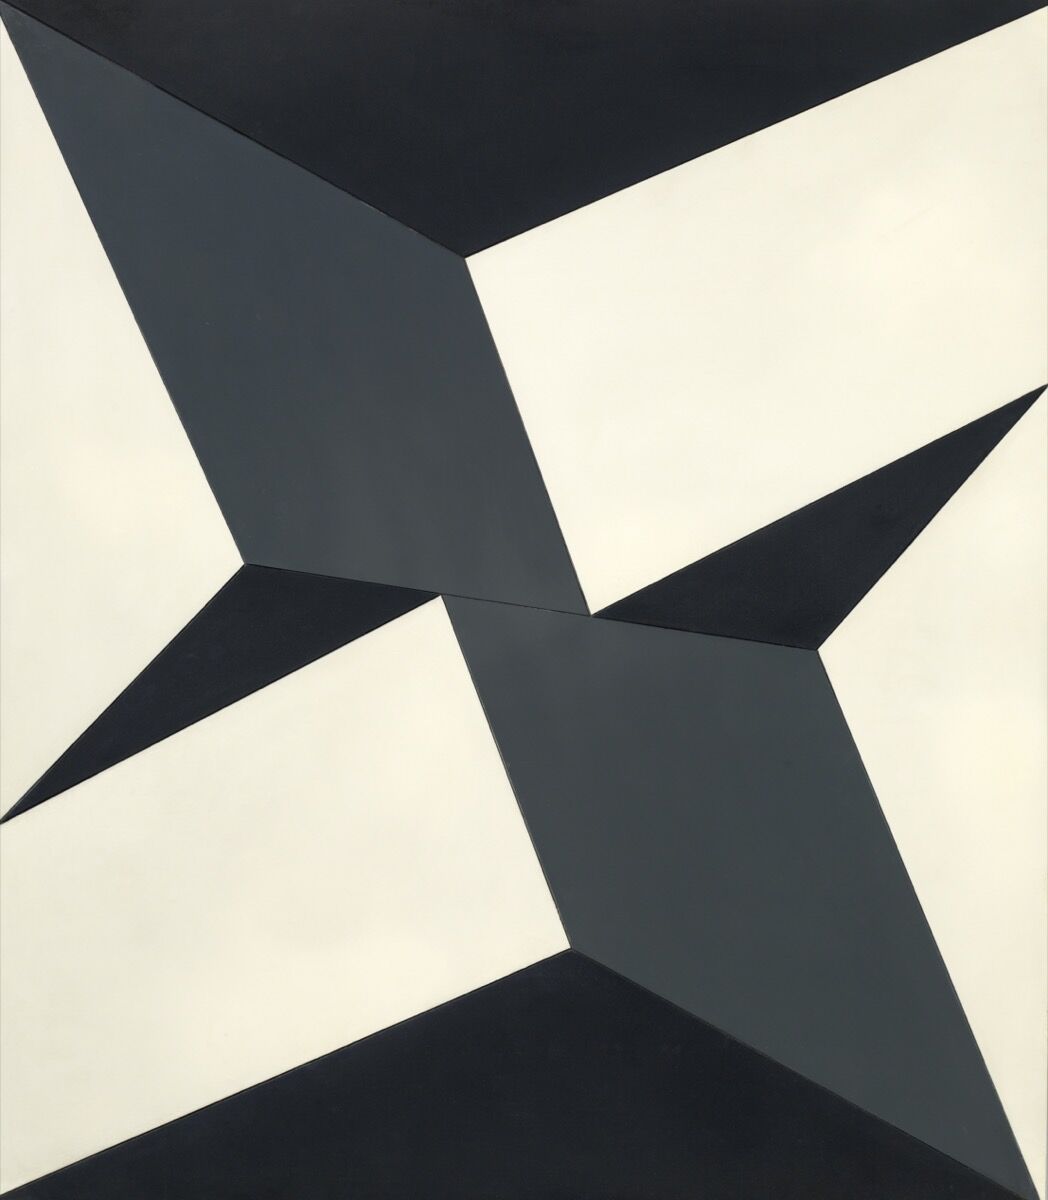 Lygia Clark, Planes on a Modulated Surface No. 5 (Planos em superfície modulada no. 5), 1957. © “The World of Lygia Clark” Cultural Association. Courtesy of The Museum of Fine Arts, Houston and The Adolpho Leirner Collection of Brazilian Constructive Art.